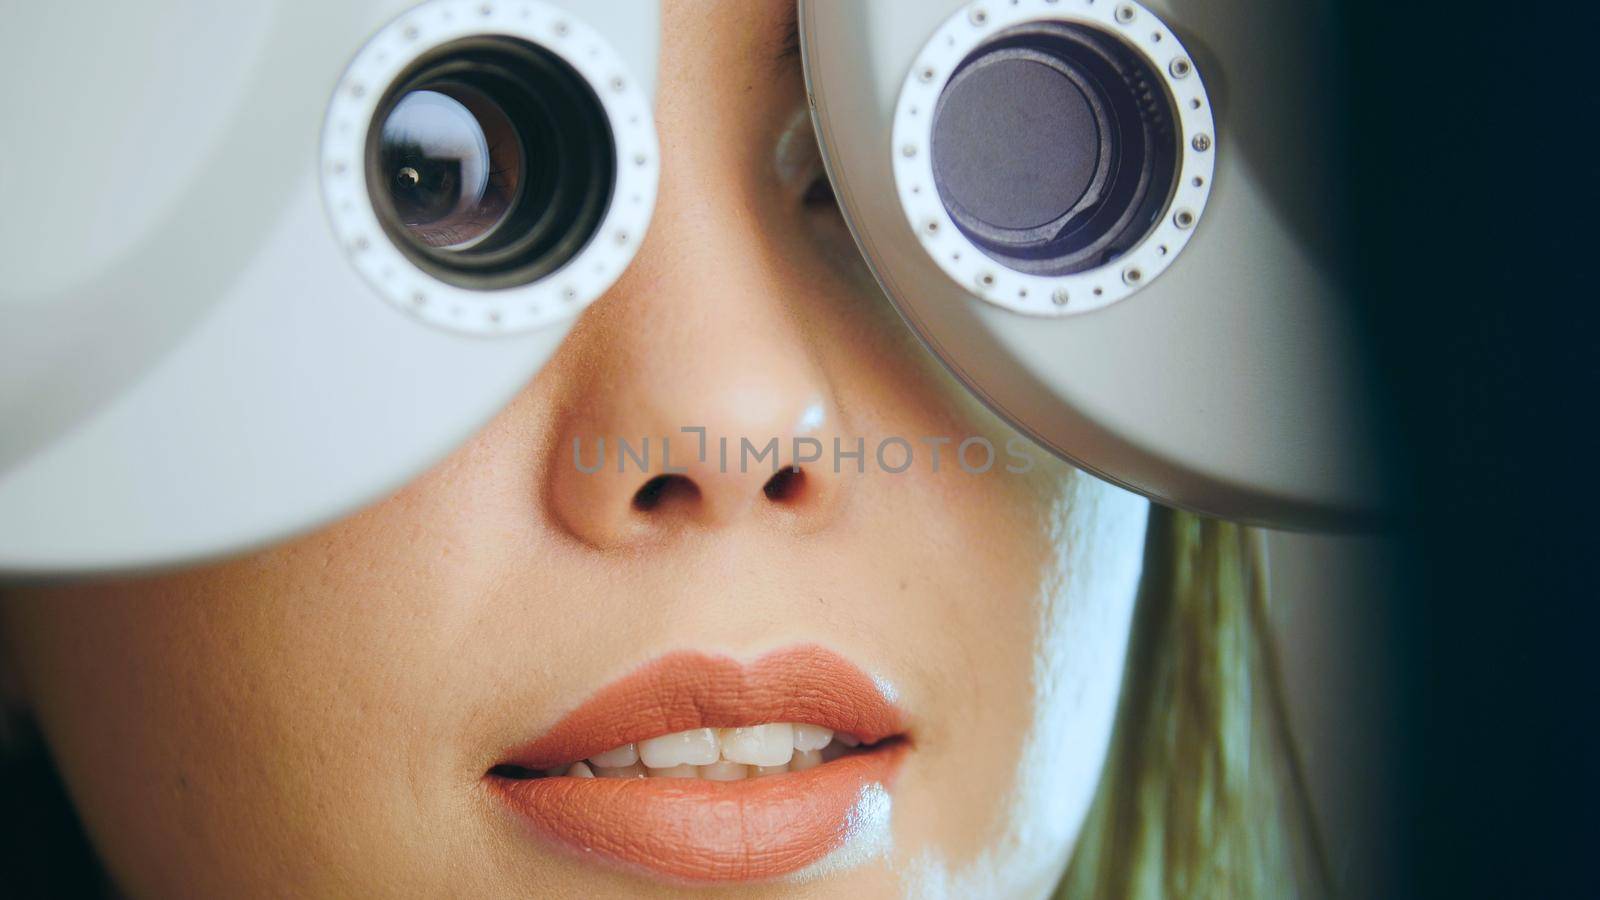 Ophthalmology - young woman checks the eyes on the modern equipment in the medical center by Studia72